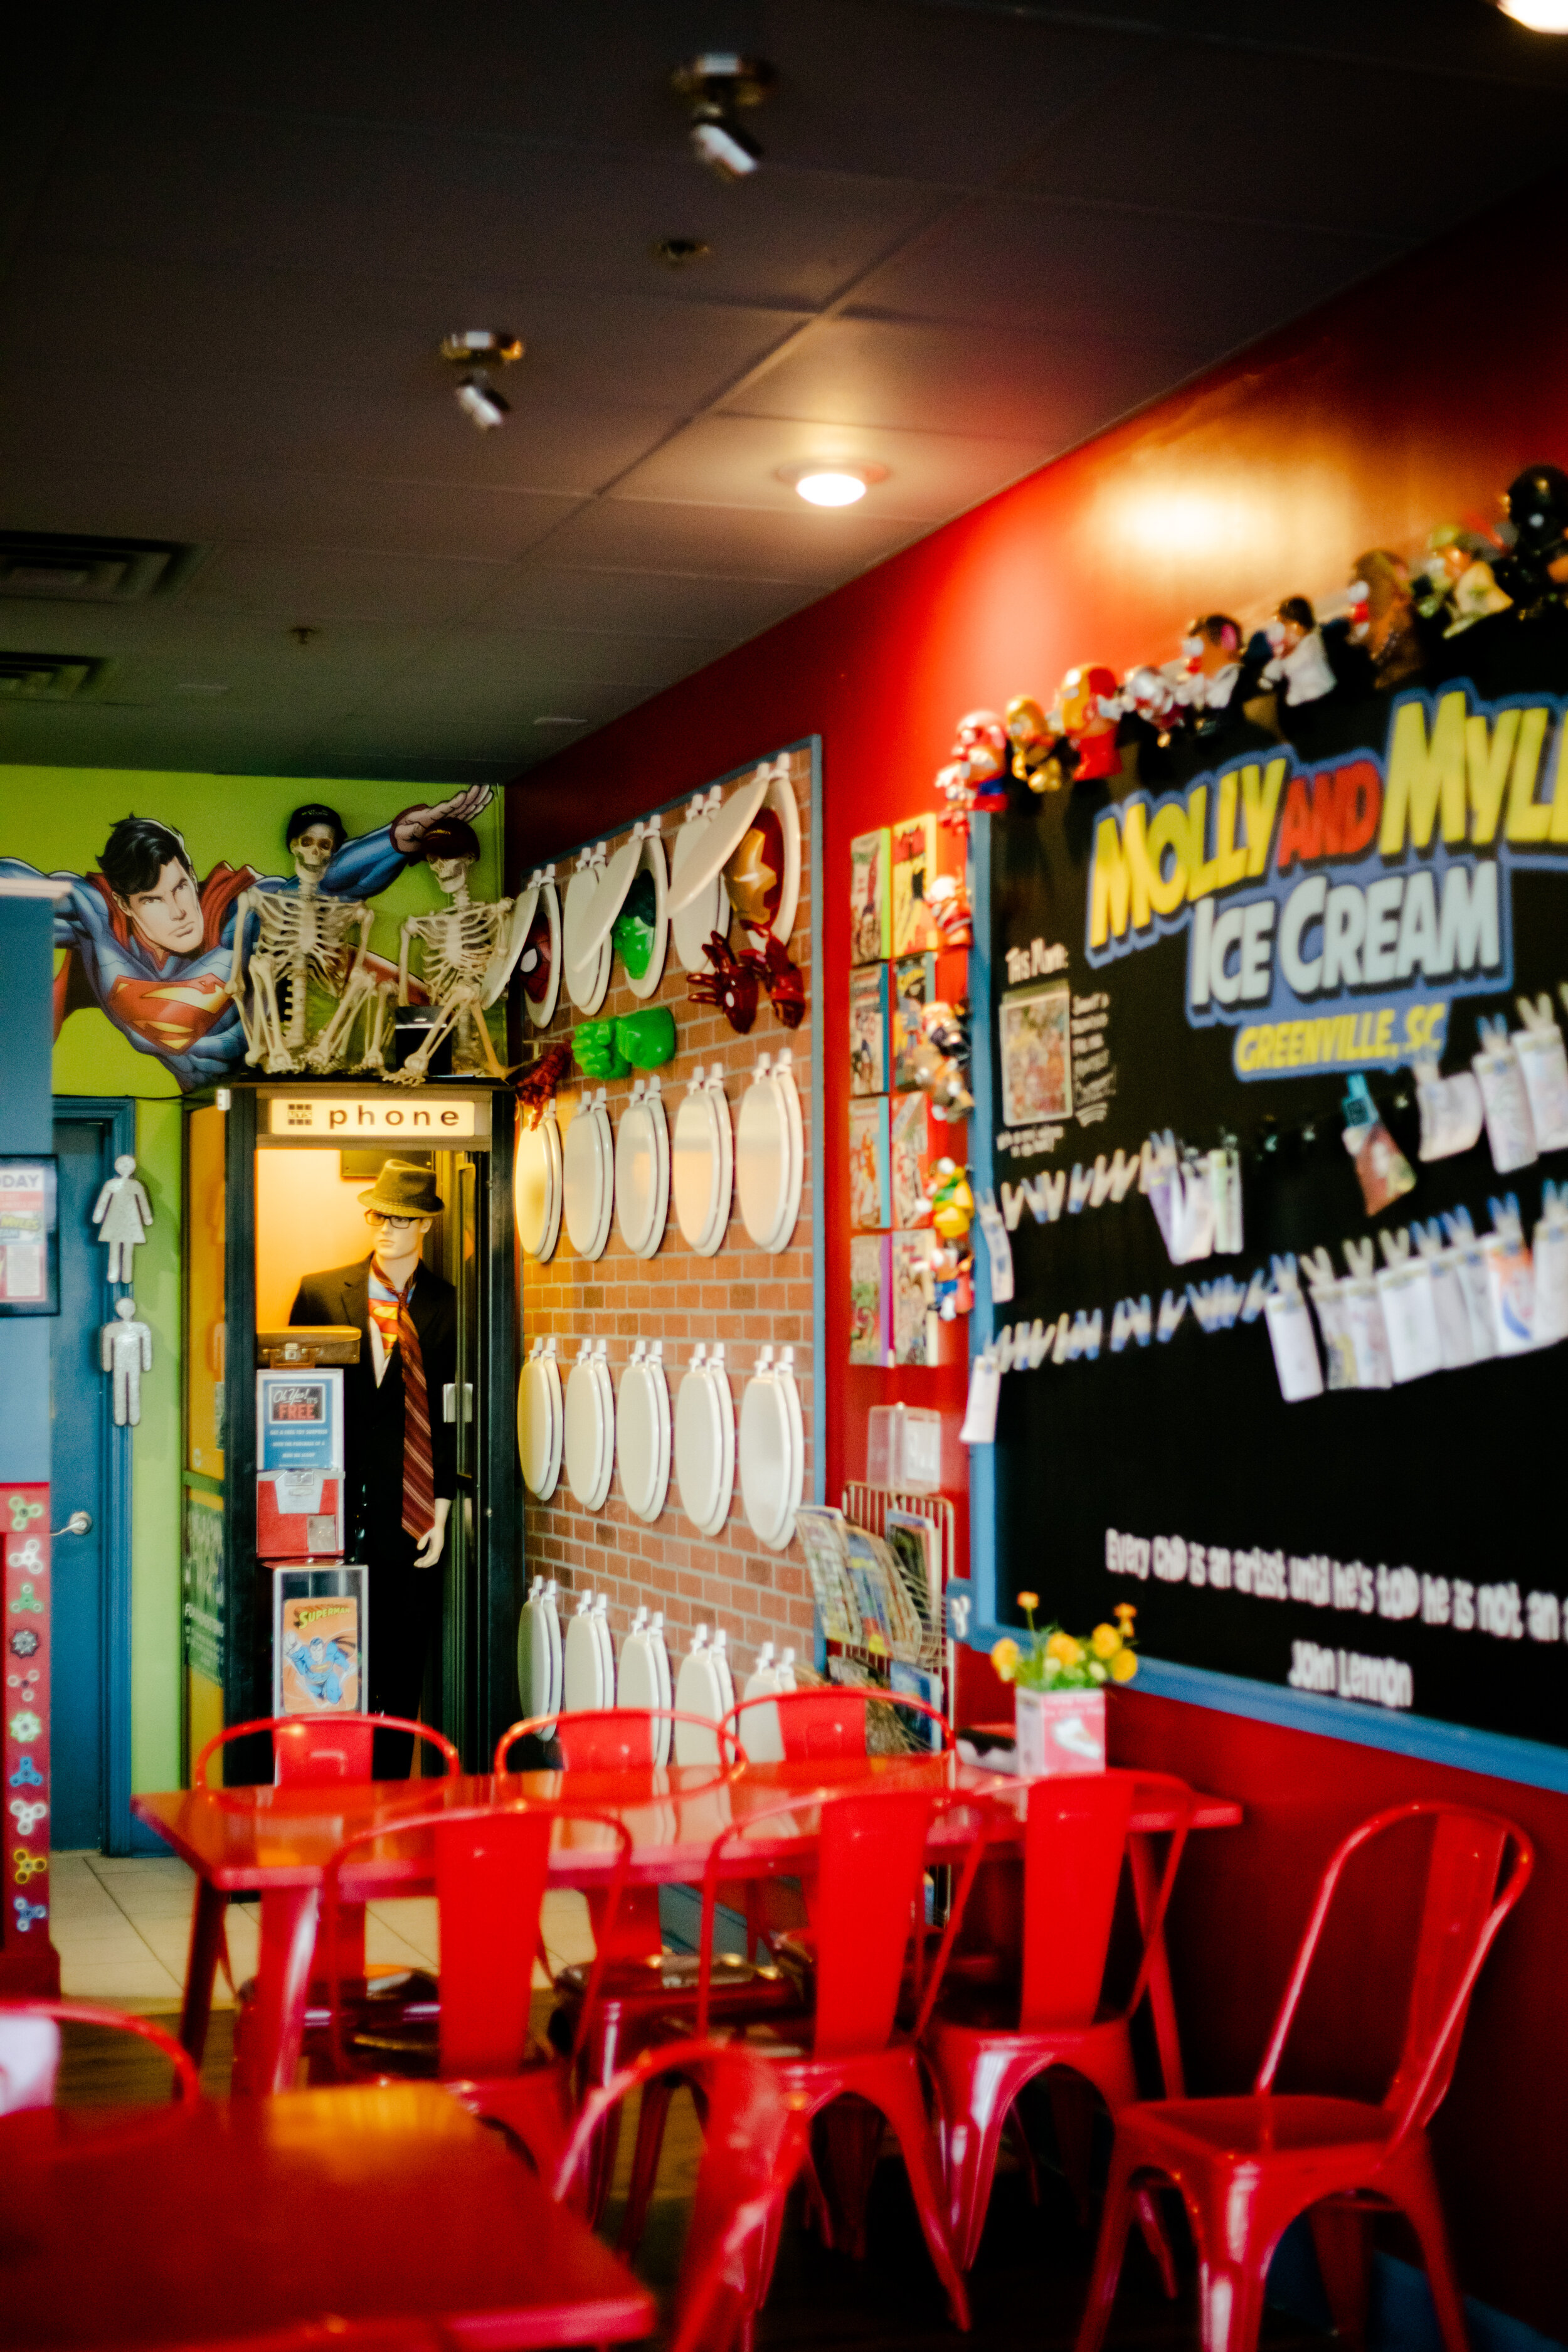 This bright-colored, superhero-themed shop is definitely one thats hard to forget.